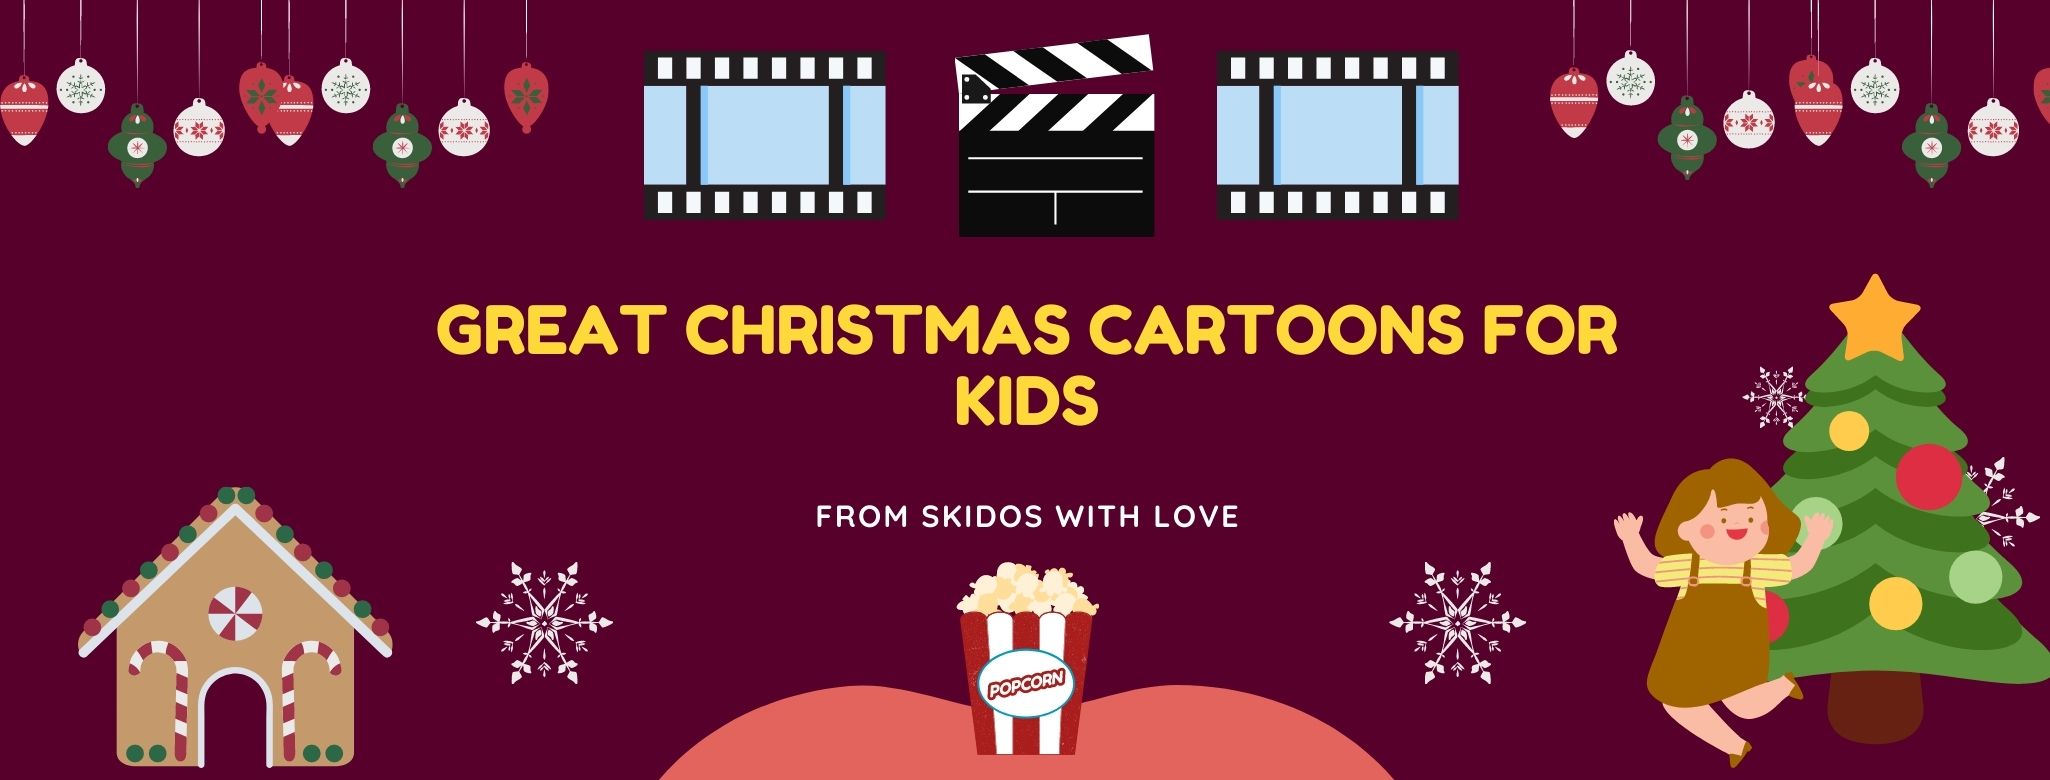 12 Meaningful Christmas Cartoons for Kids 🎄 [with Trailers] - SKIDOS